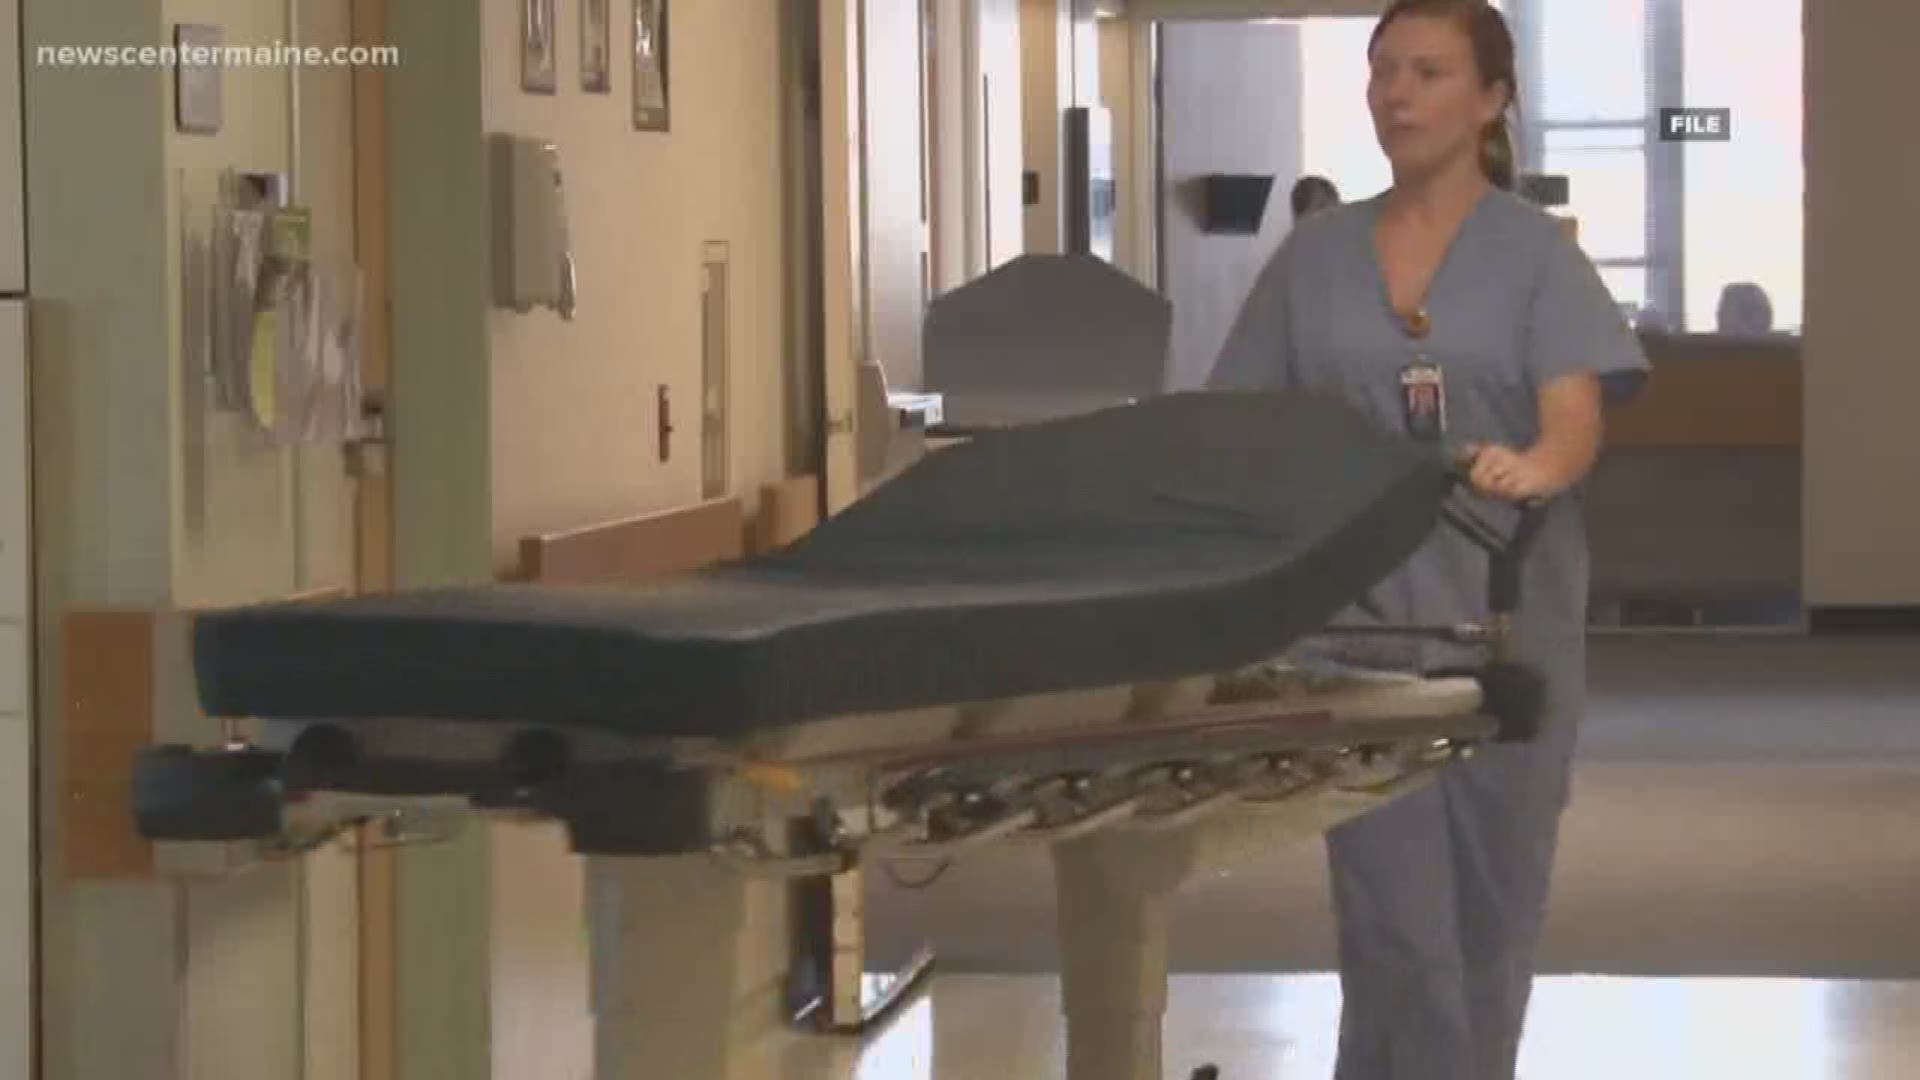 Five rural Maine hospitals are receiving help from a new federal program.